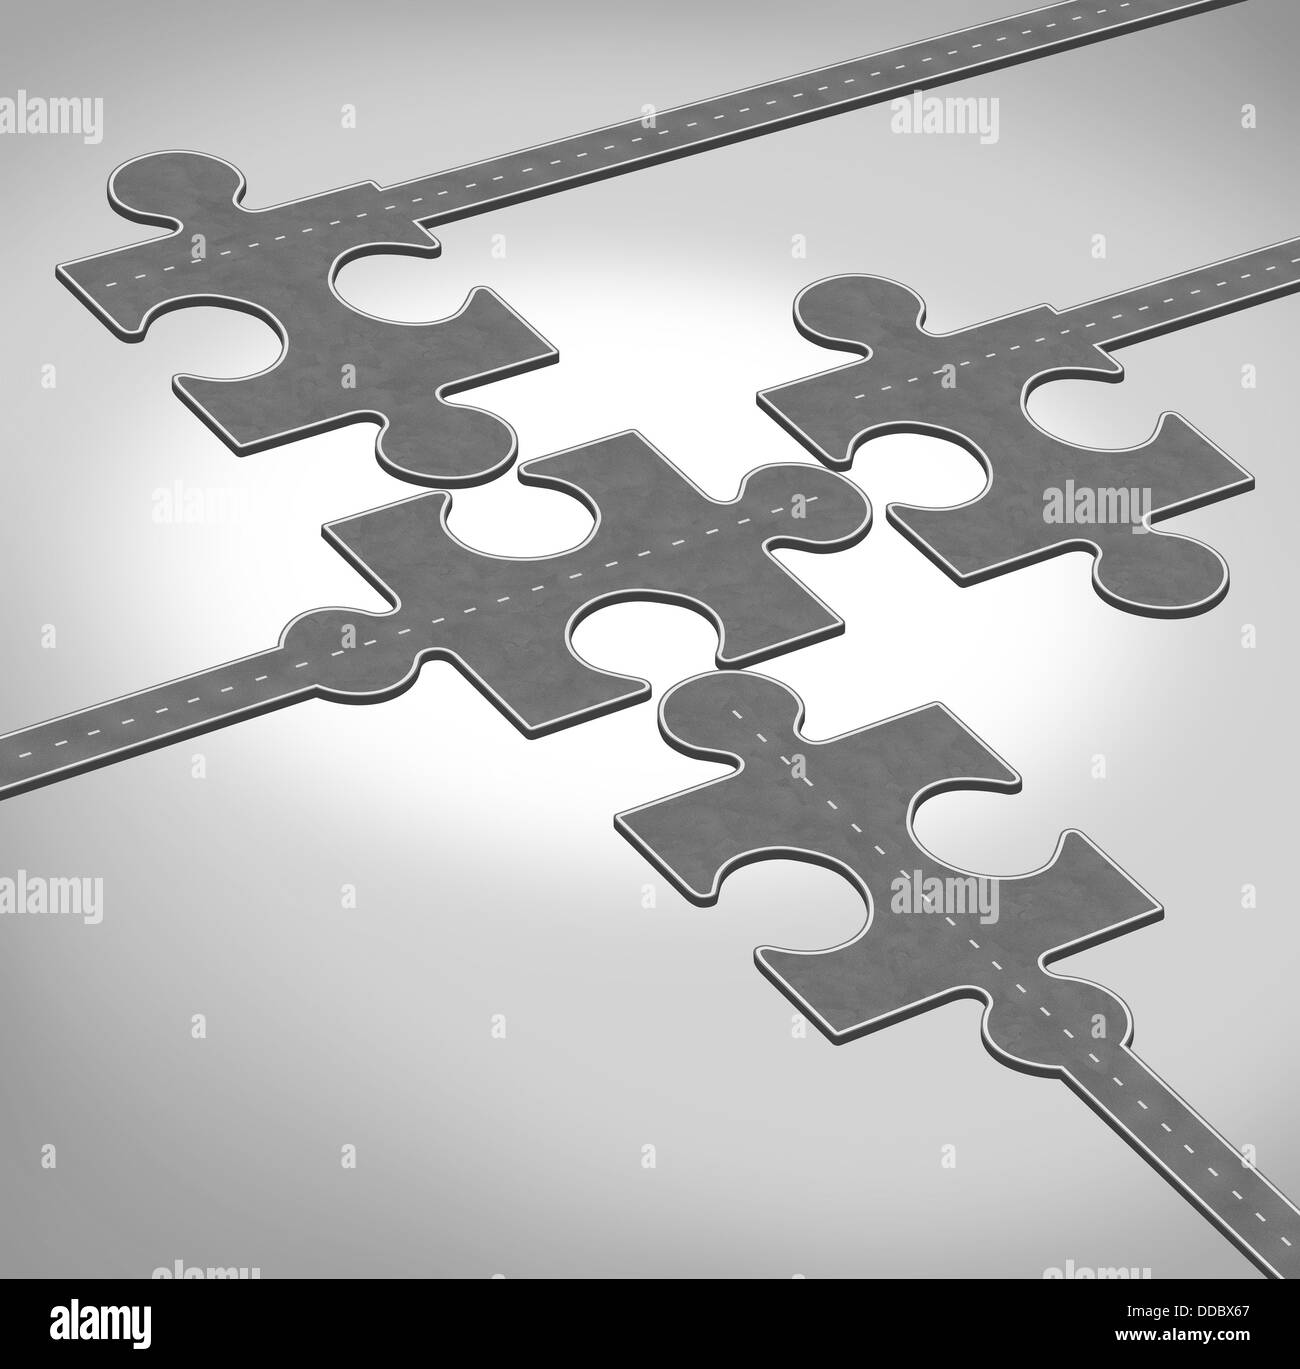 Connection direction as a business concept of a group of roads or highways shaped as jigsaw puzzle pieces connecting together as a team partnership bridging the gap for financial success through creative solutions. Stock Photo